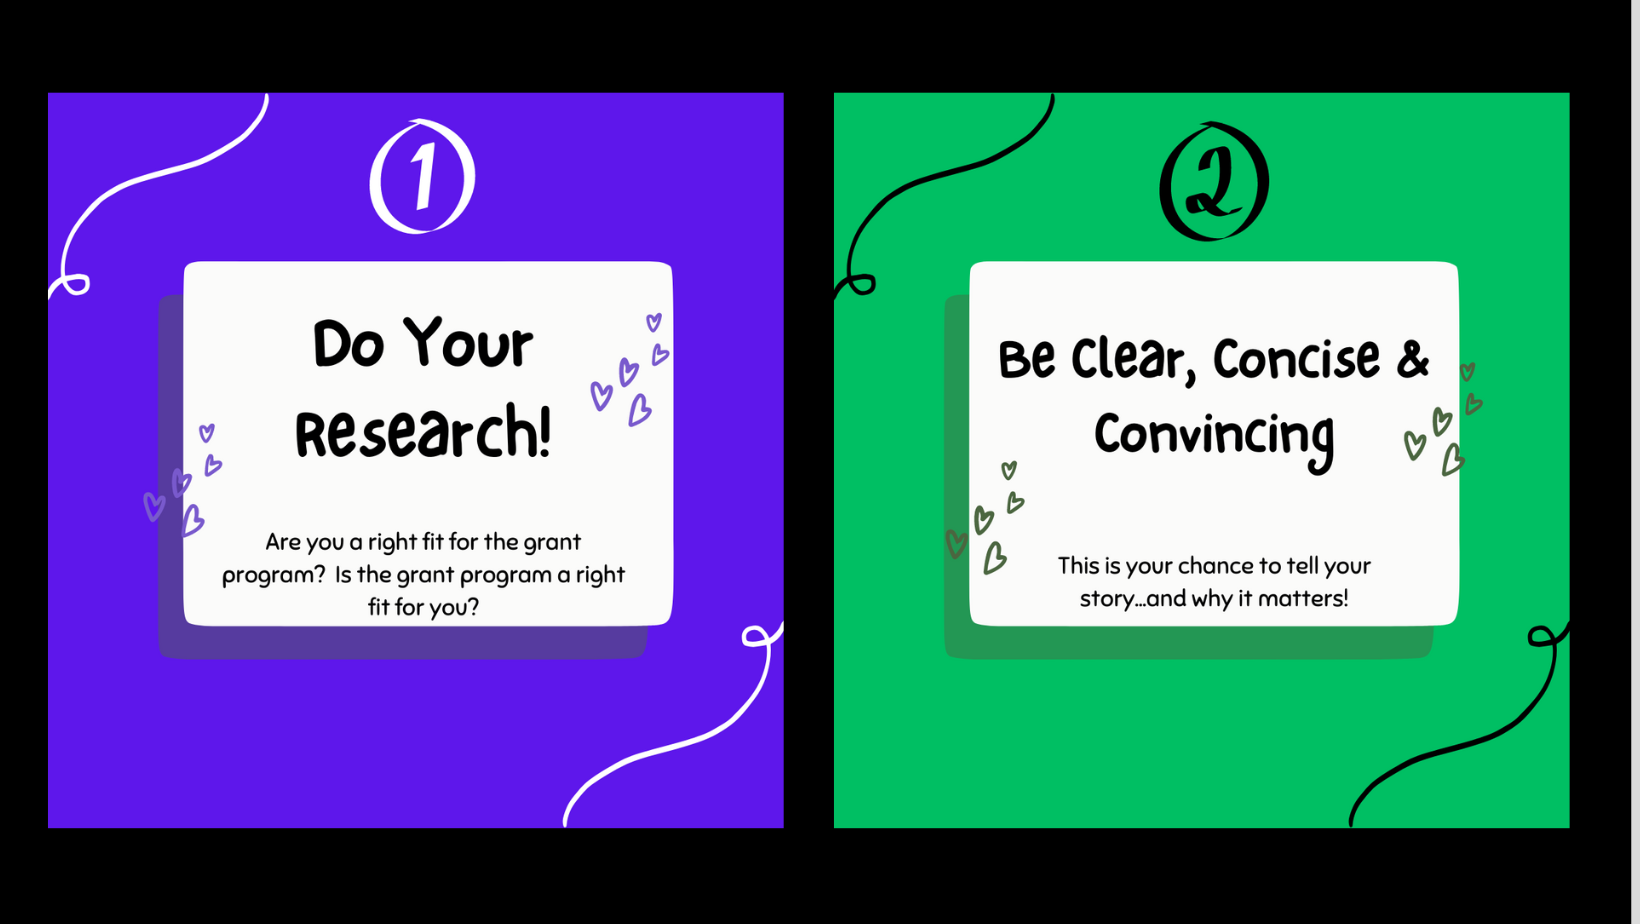 Top Tip #1: Do Your Research!  Top Tip #2: Be Clear, Concise & Convincing